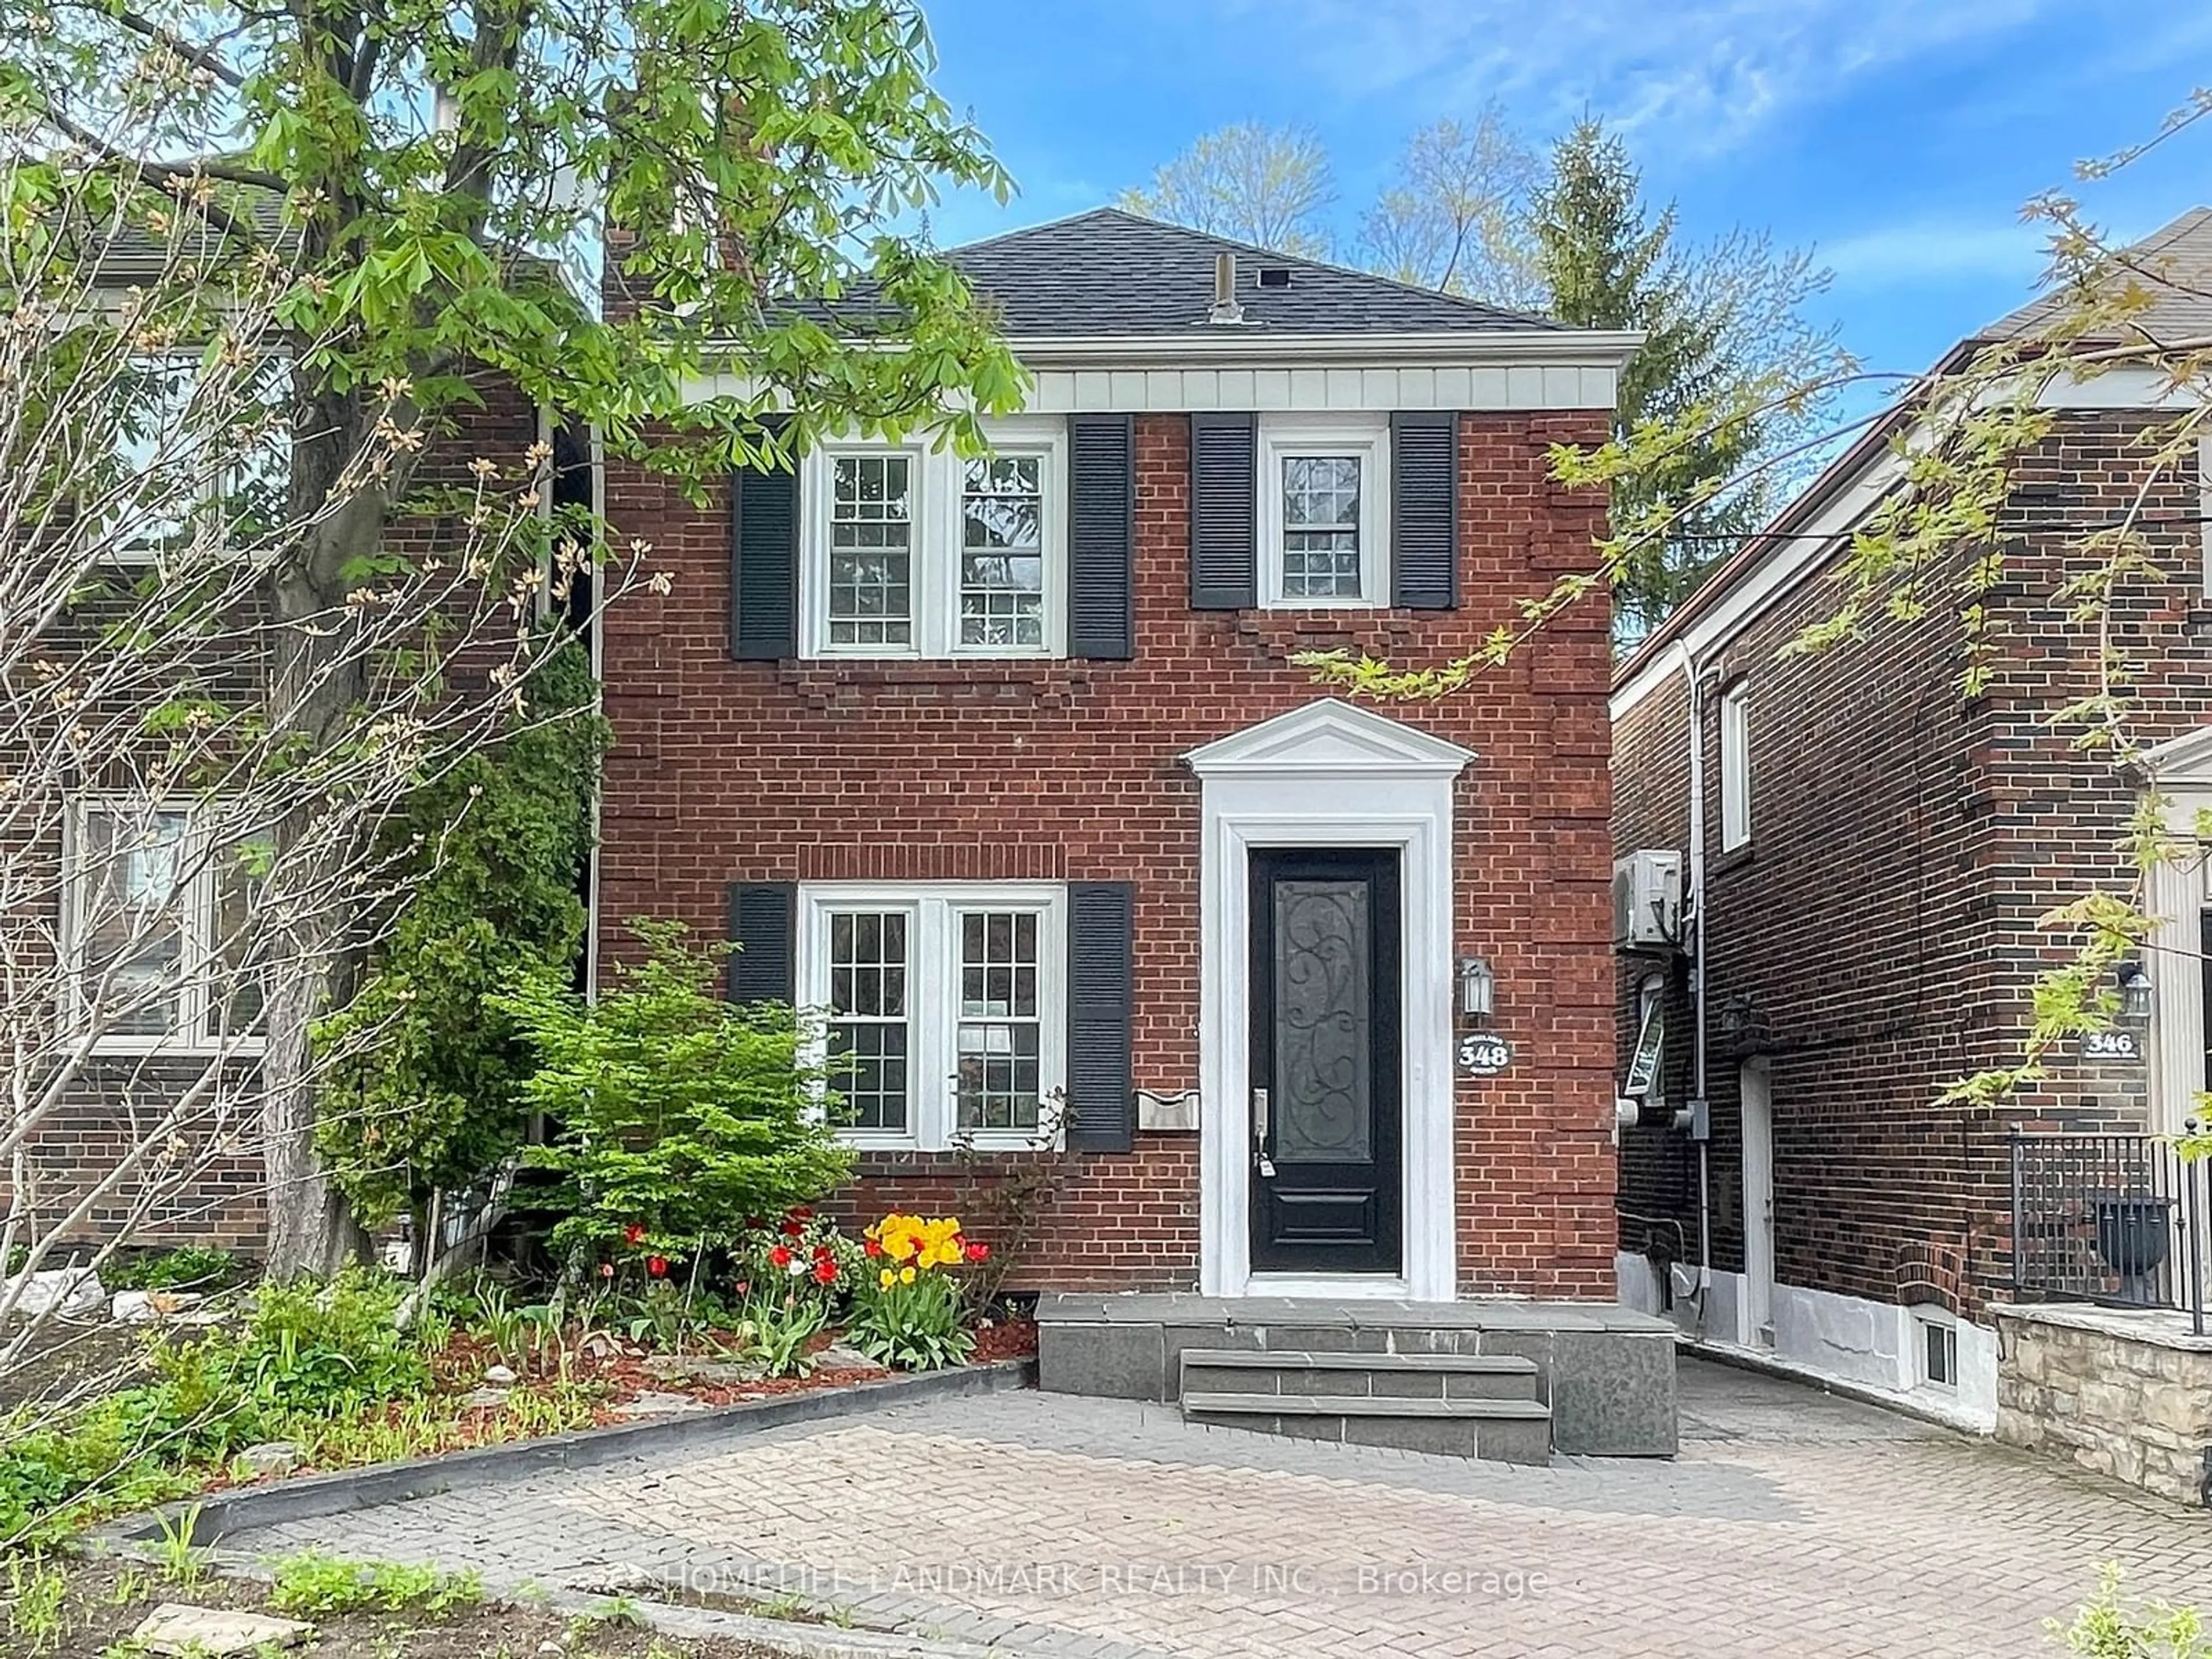 Home with brick exterior material for 348 Roselawn Ave, Toronto Ontario M4R 1G1